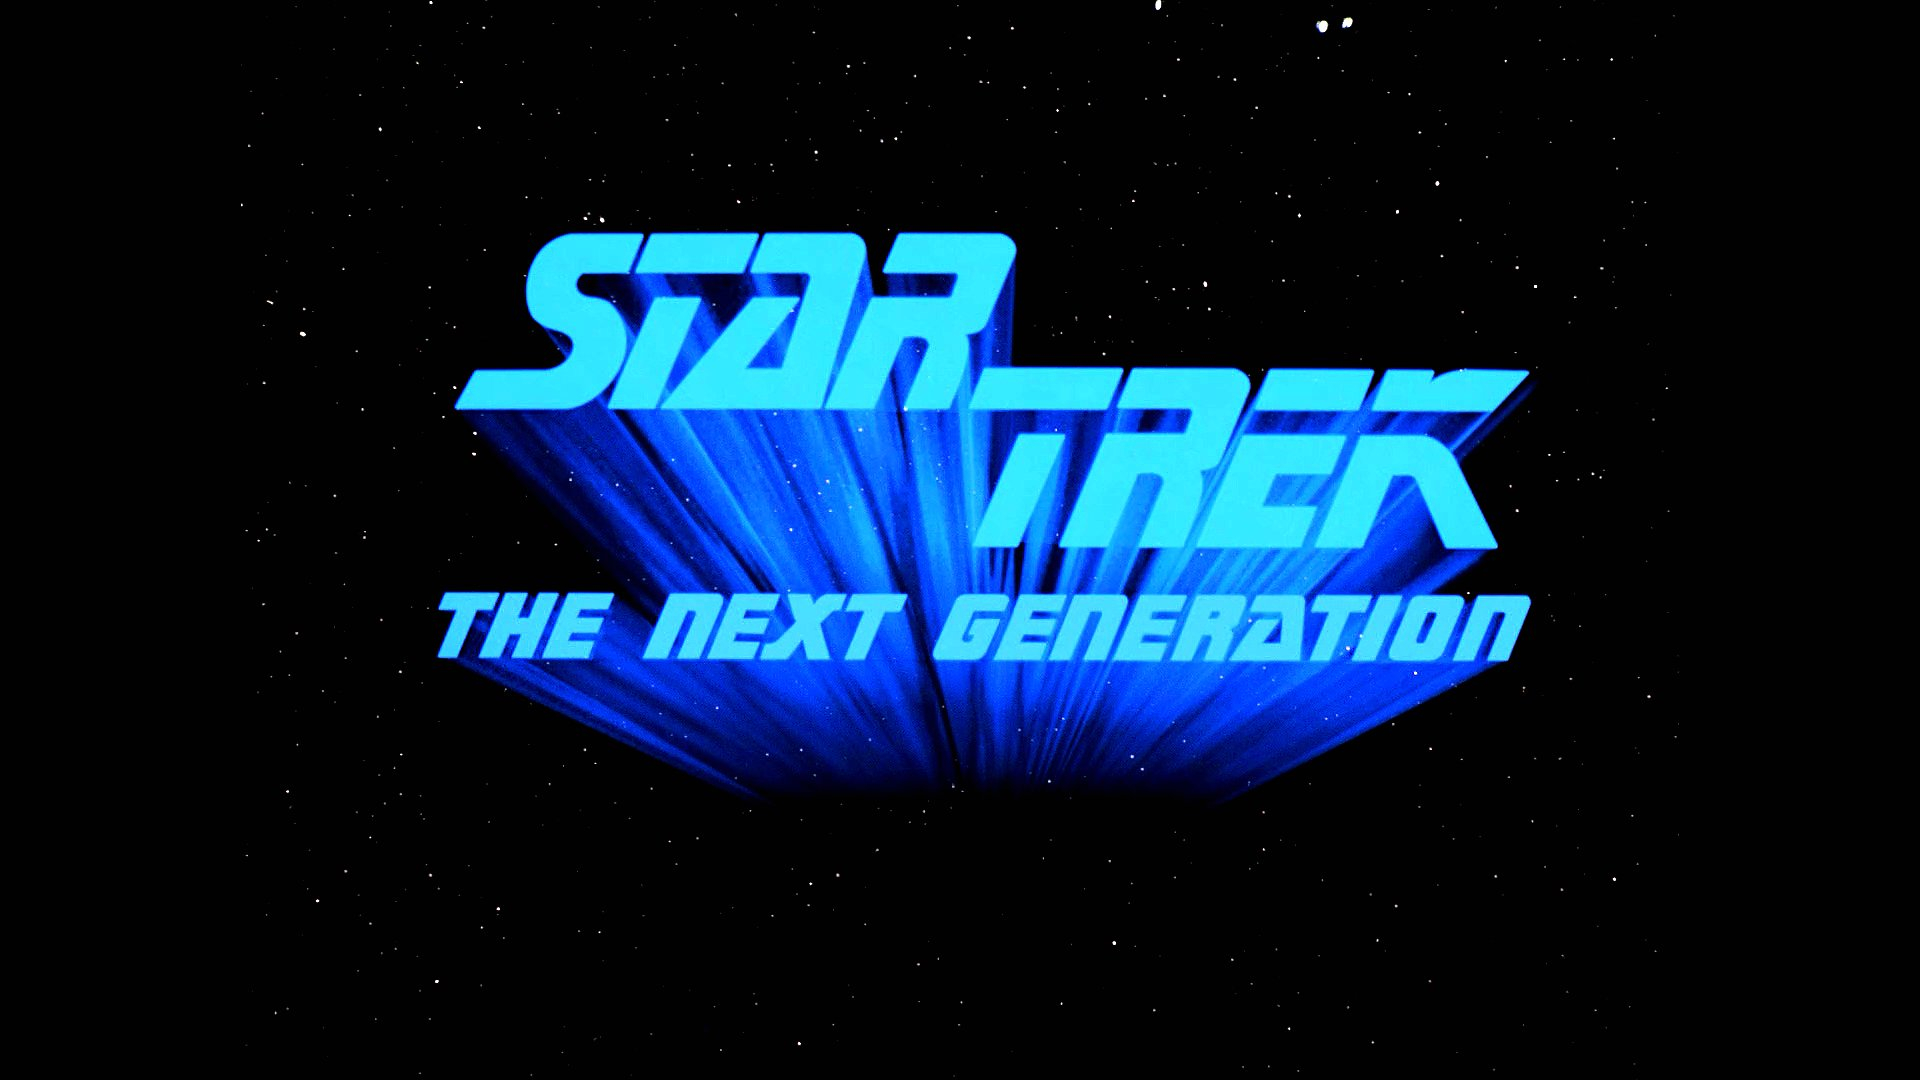 1920x1080 next, Generation, Star, Trek, Sci fi, Adventure, Action, Television, Futuristic, Series, Drama, 5 Wallpapers HD / Desktop and Mobile Backgrounds